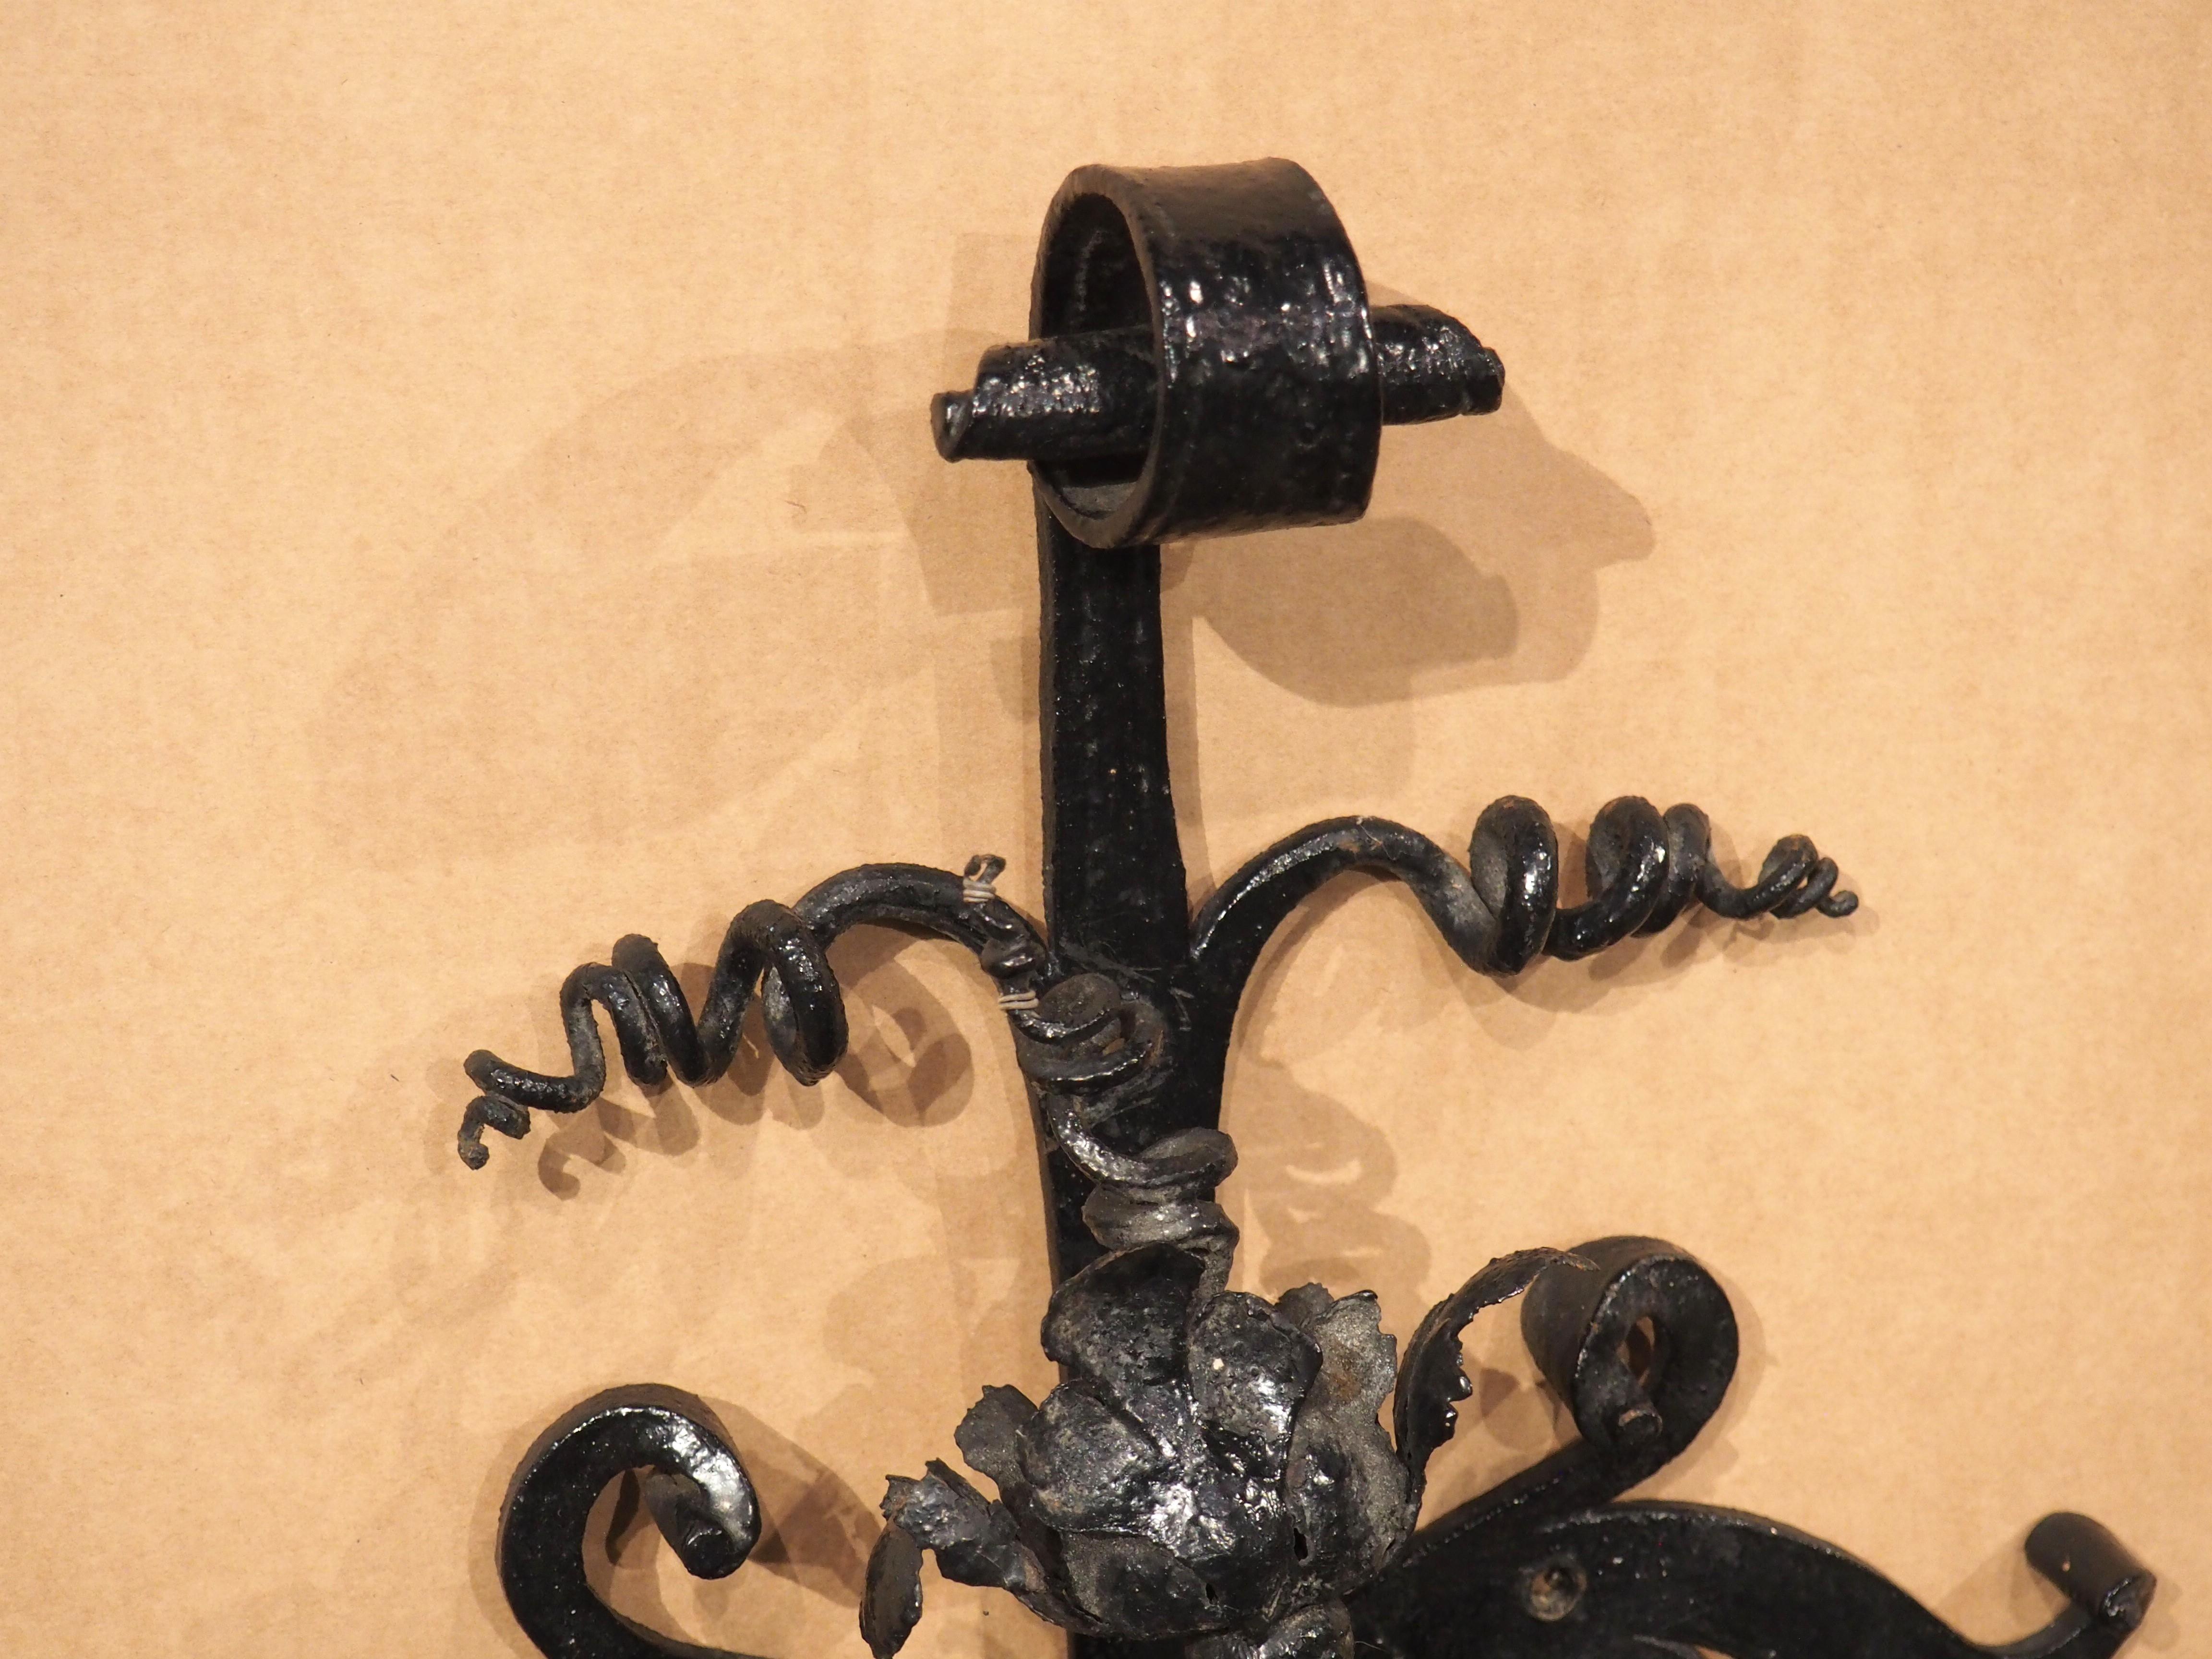 A true work of art, featuring a resplendent display of foliage and scrolls, this iron wall bell was hand-wrought in France during the 1800s. The bell is nestled within an ornate display of foliate rinceaux accented by corkscrew tendrils and volutes.